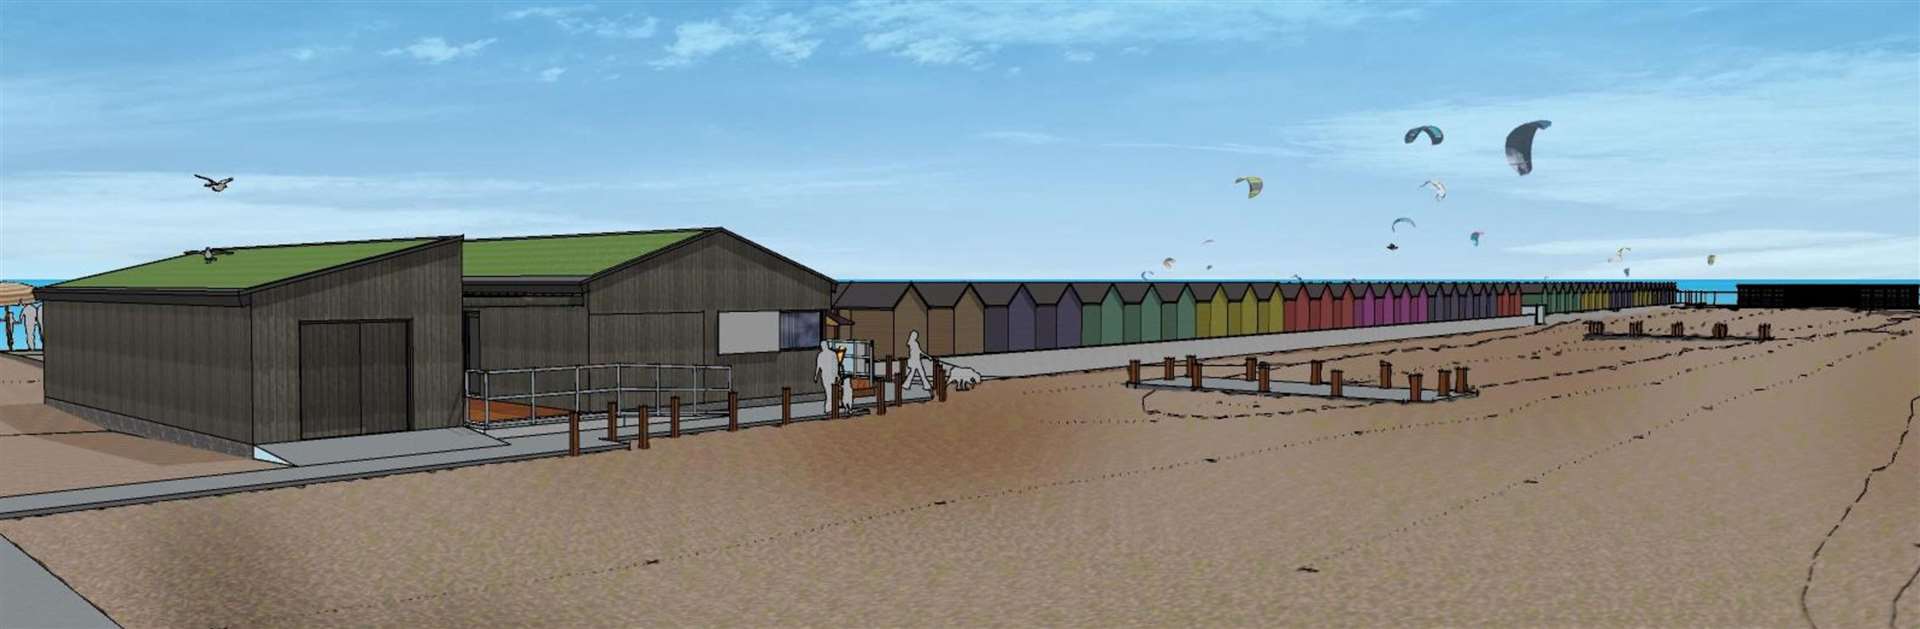 A visitor centre and facilities such as loos and showers are also planned. Picture: FHDC